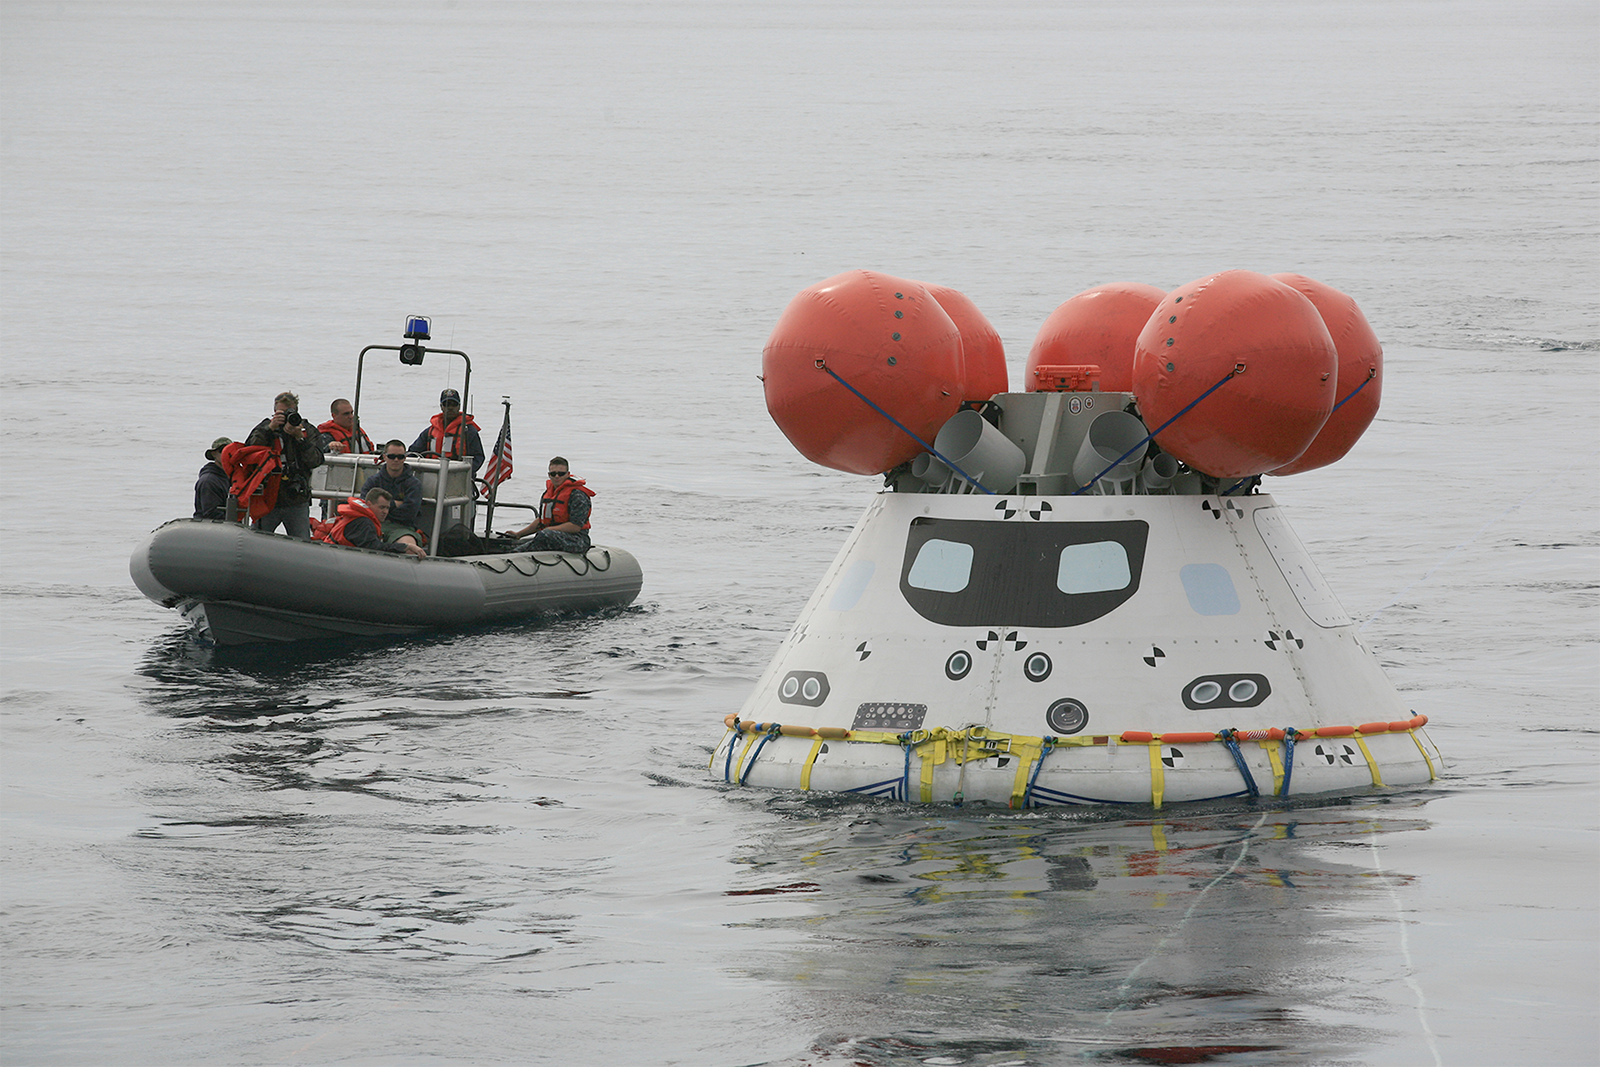 Orion floats in the ocean during a test